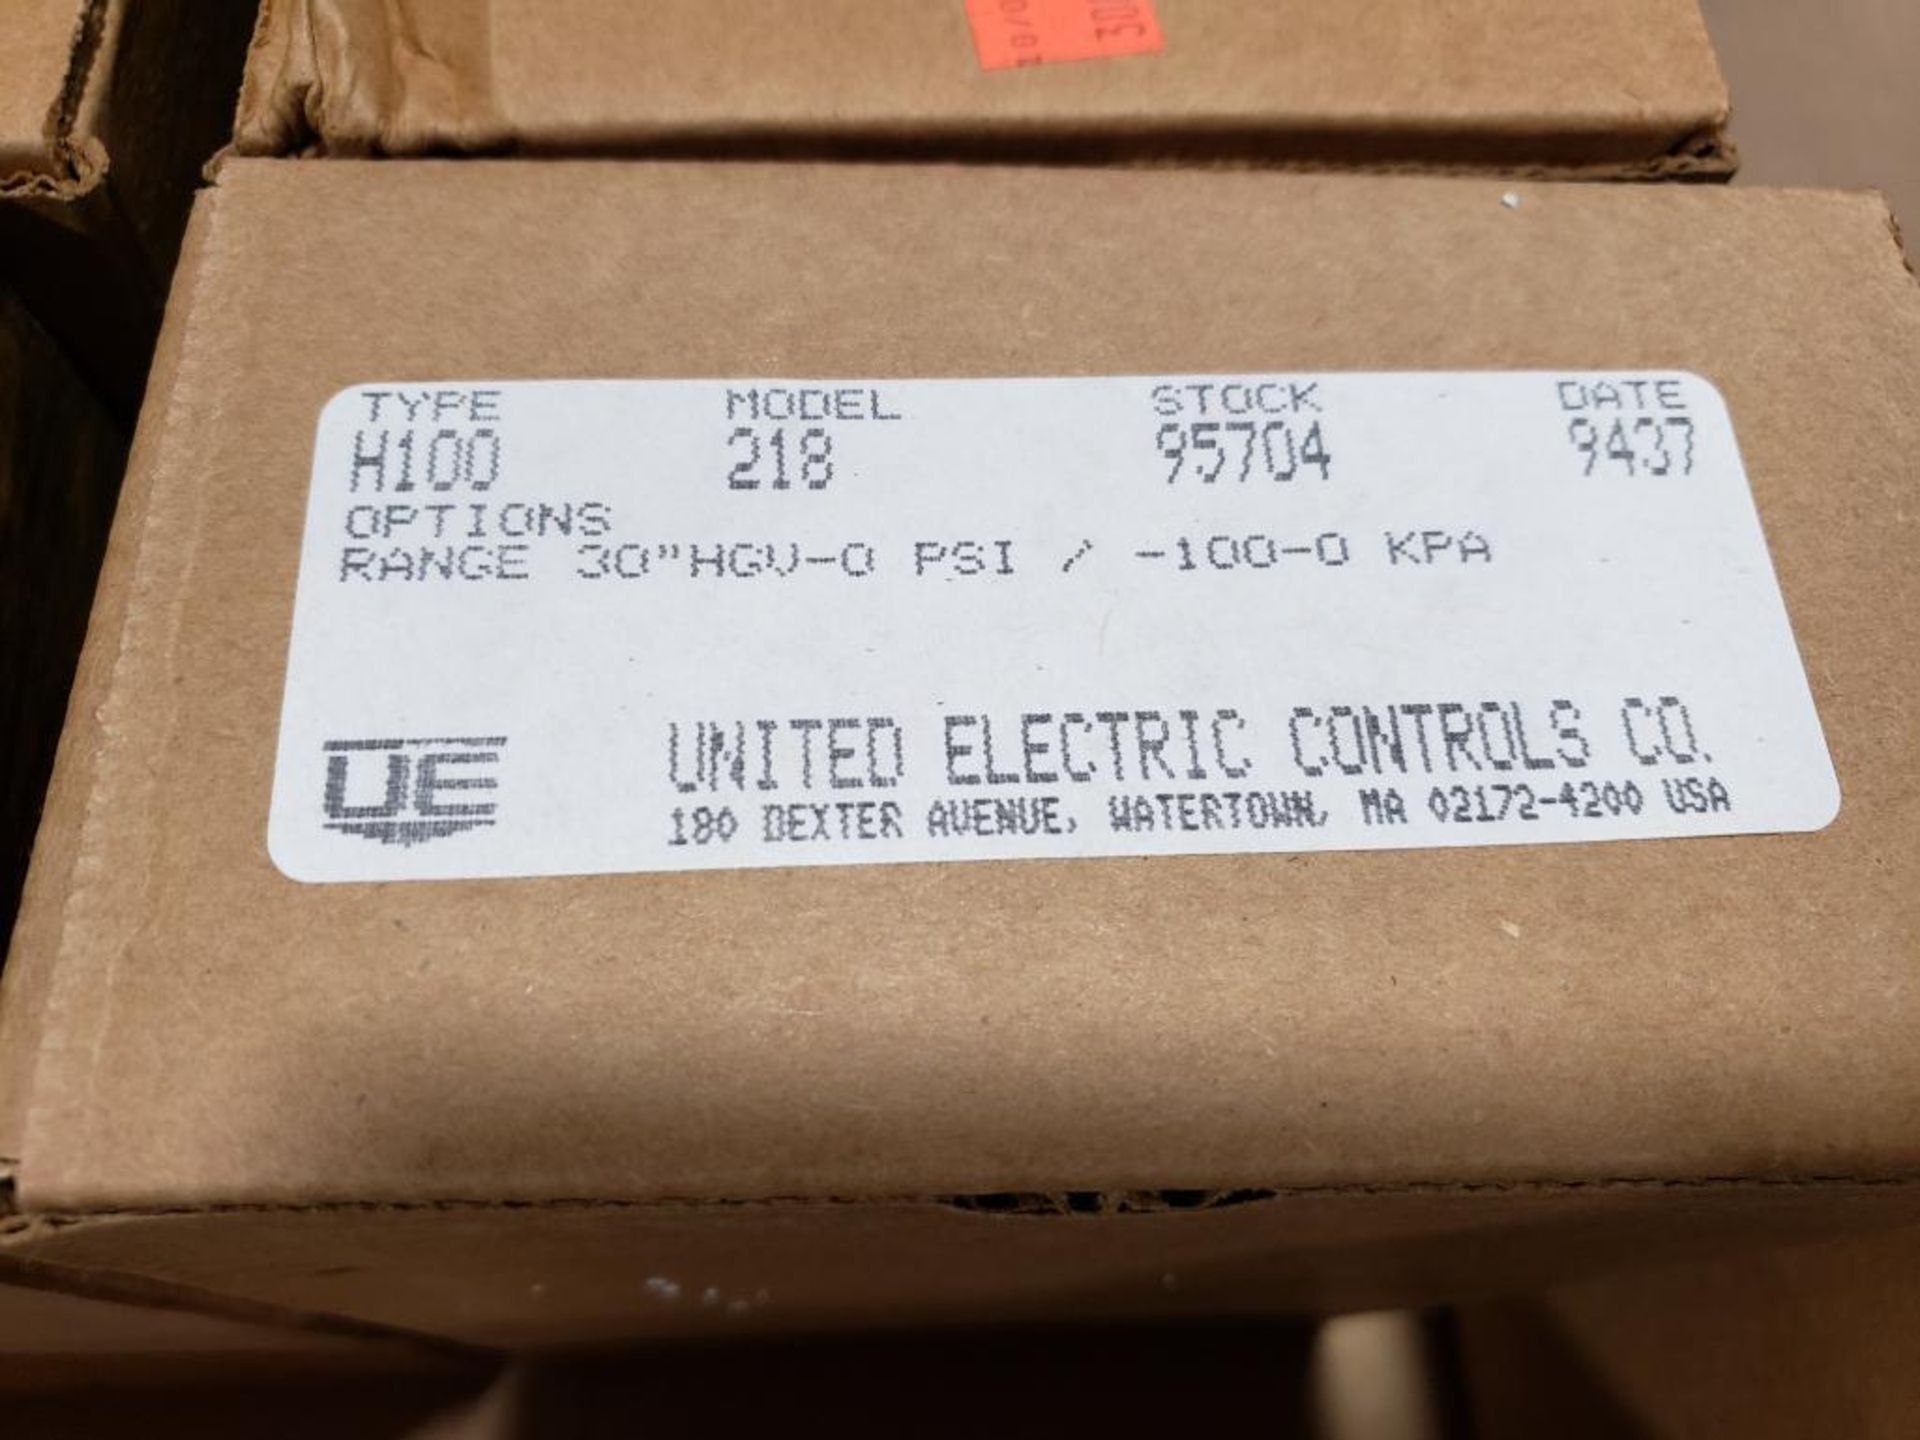 Qty 6 - UE pressure switch. Part number H100-218. - Image 2 of 6